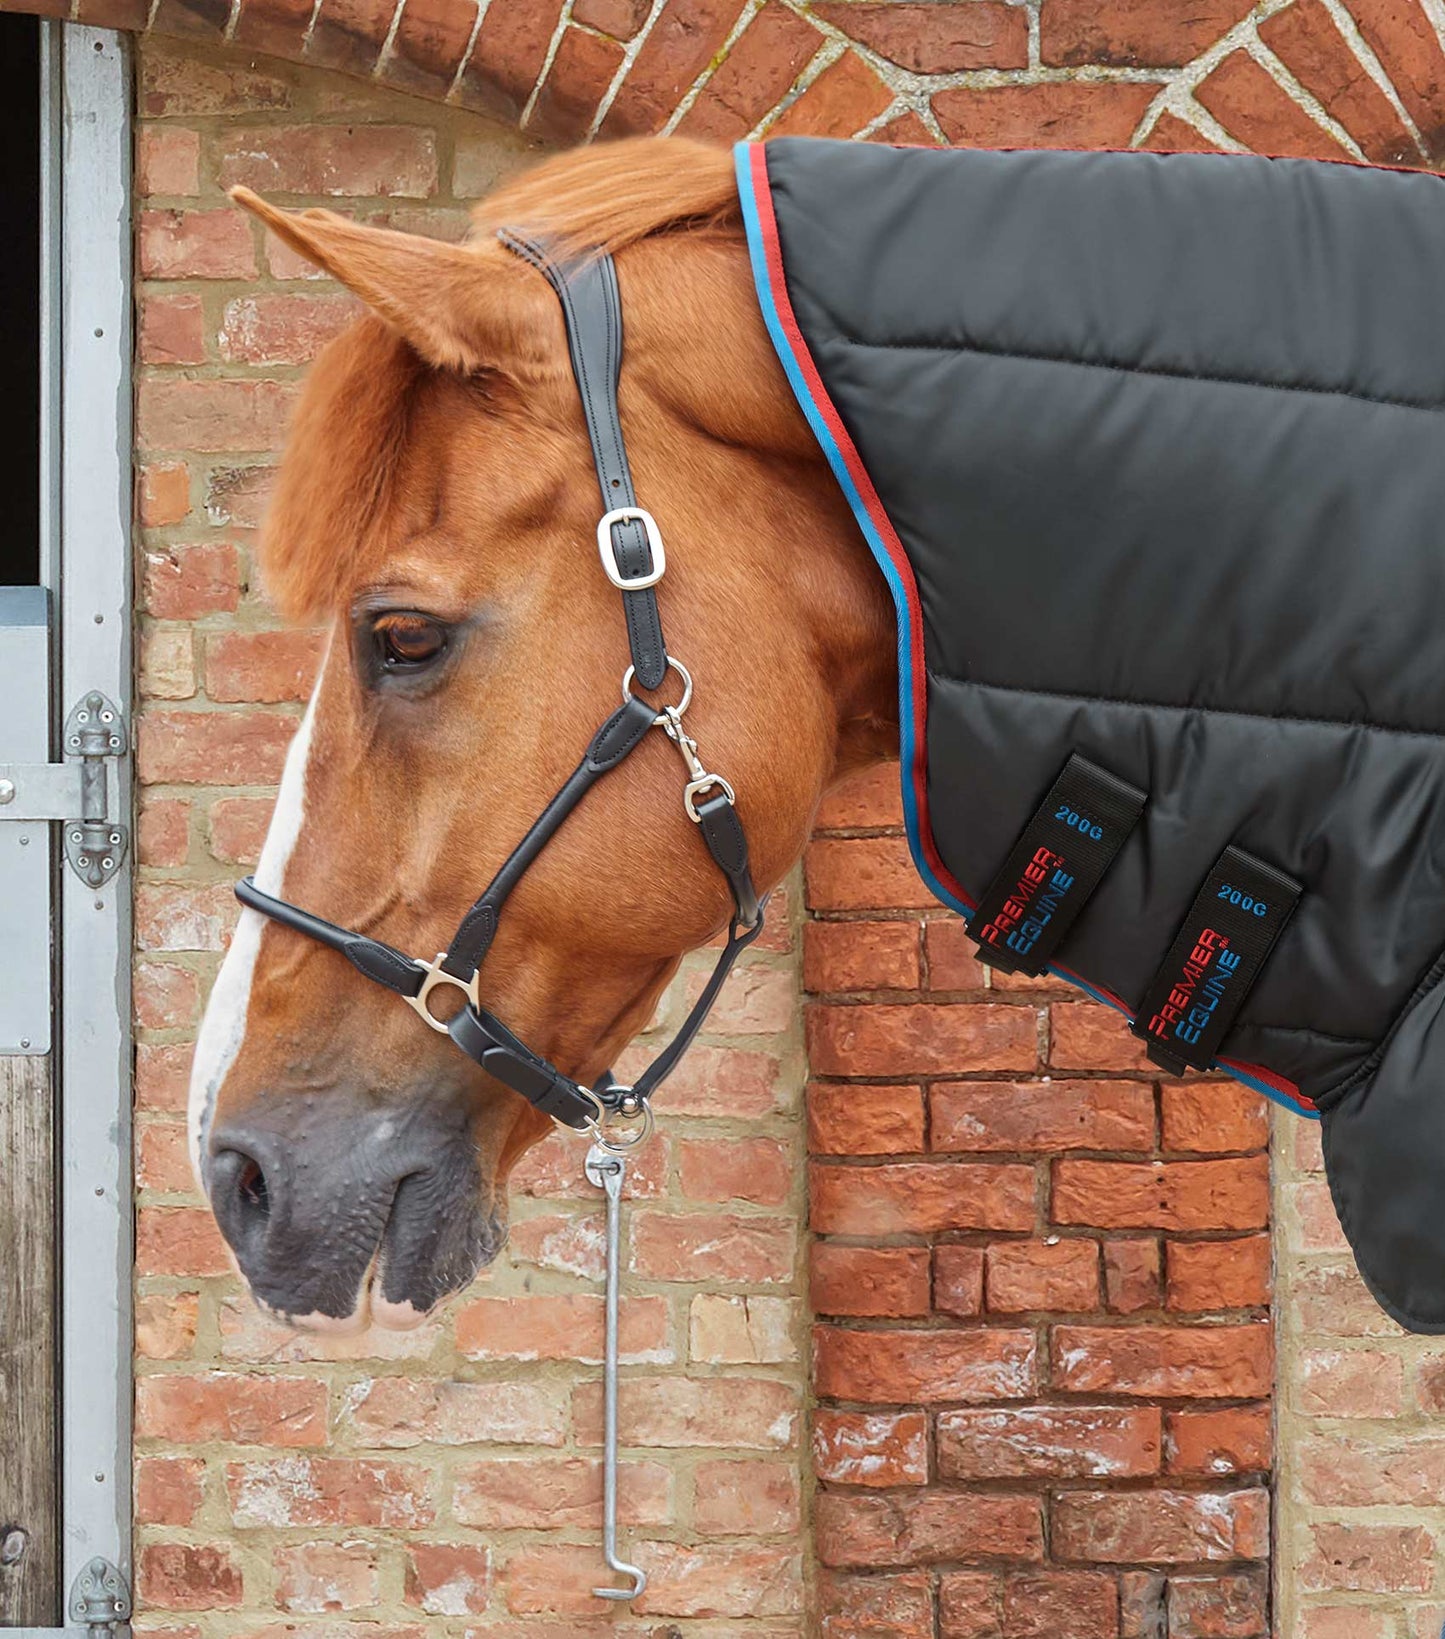 Premier Equine Combo Stable Rug 200g